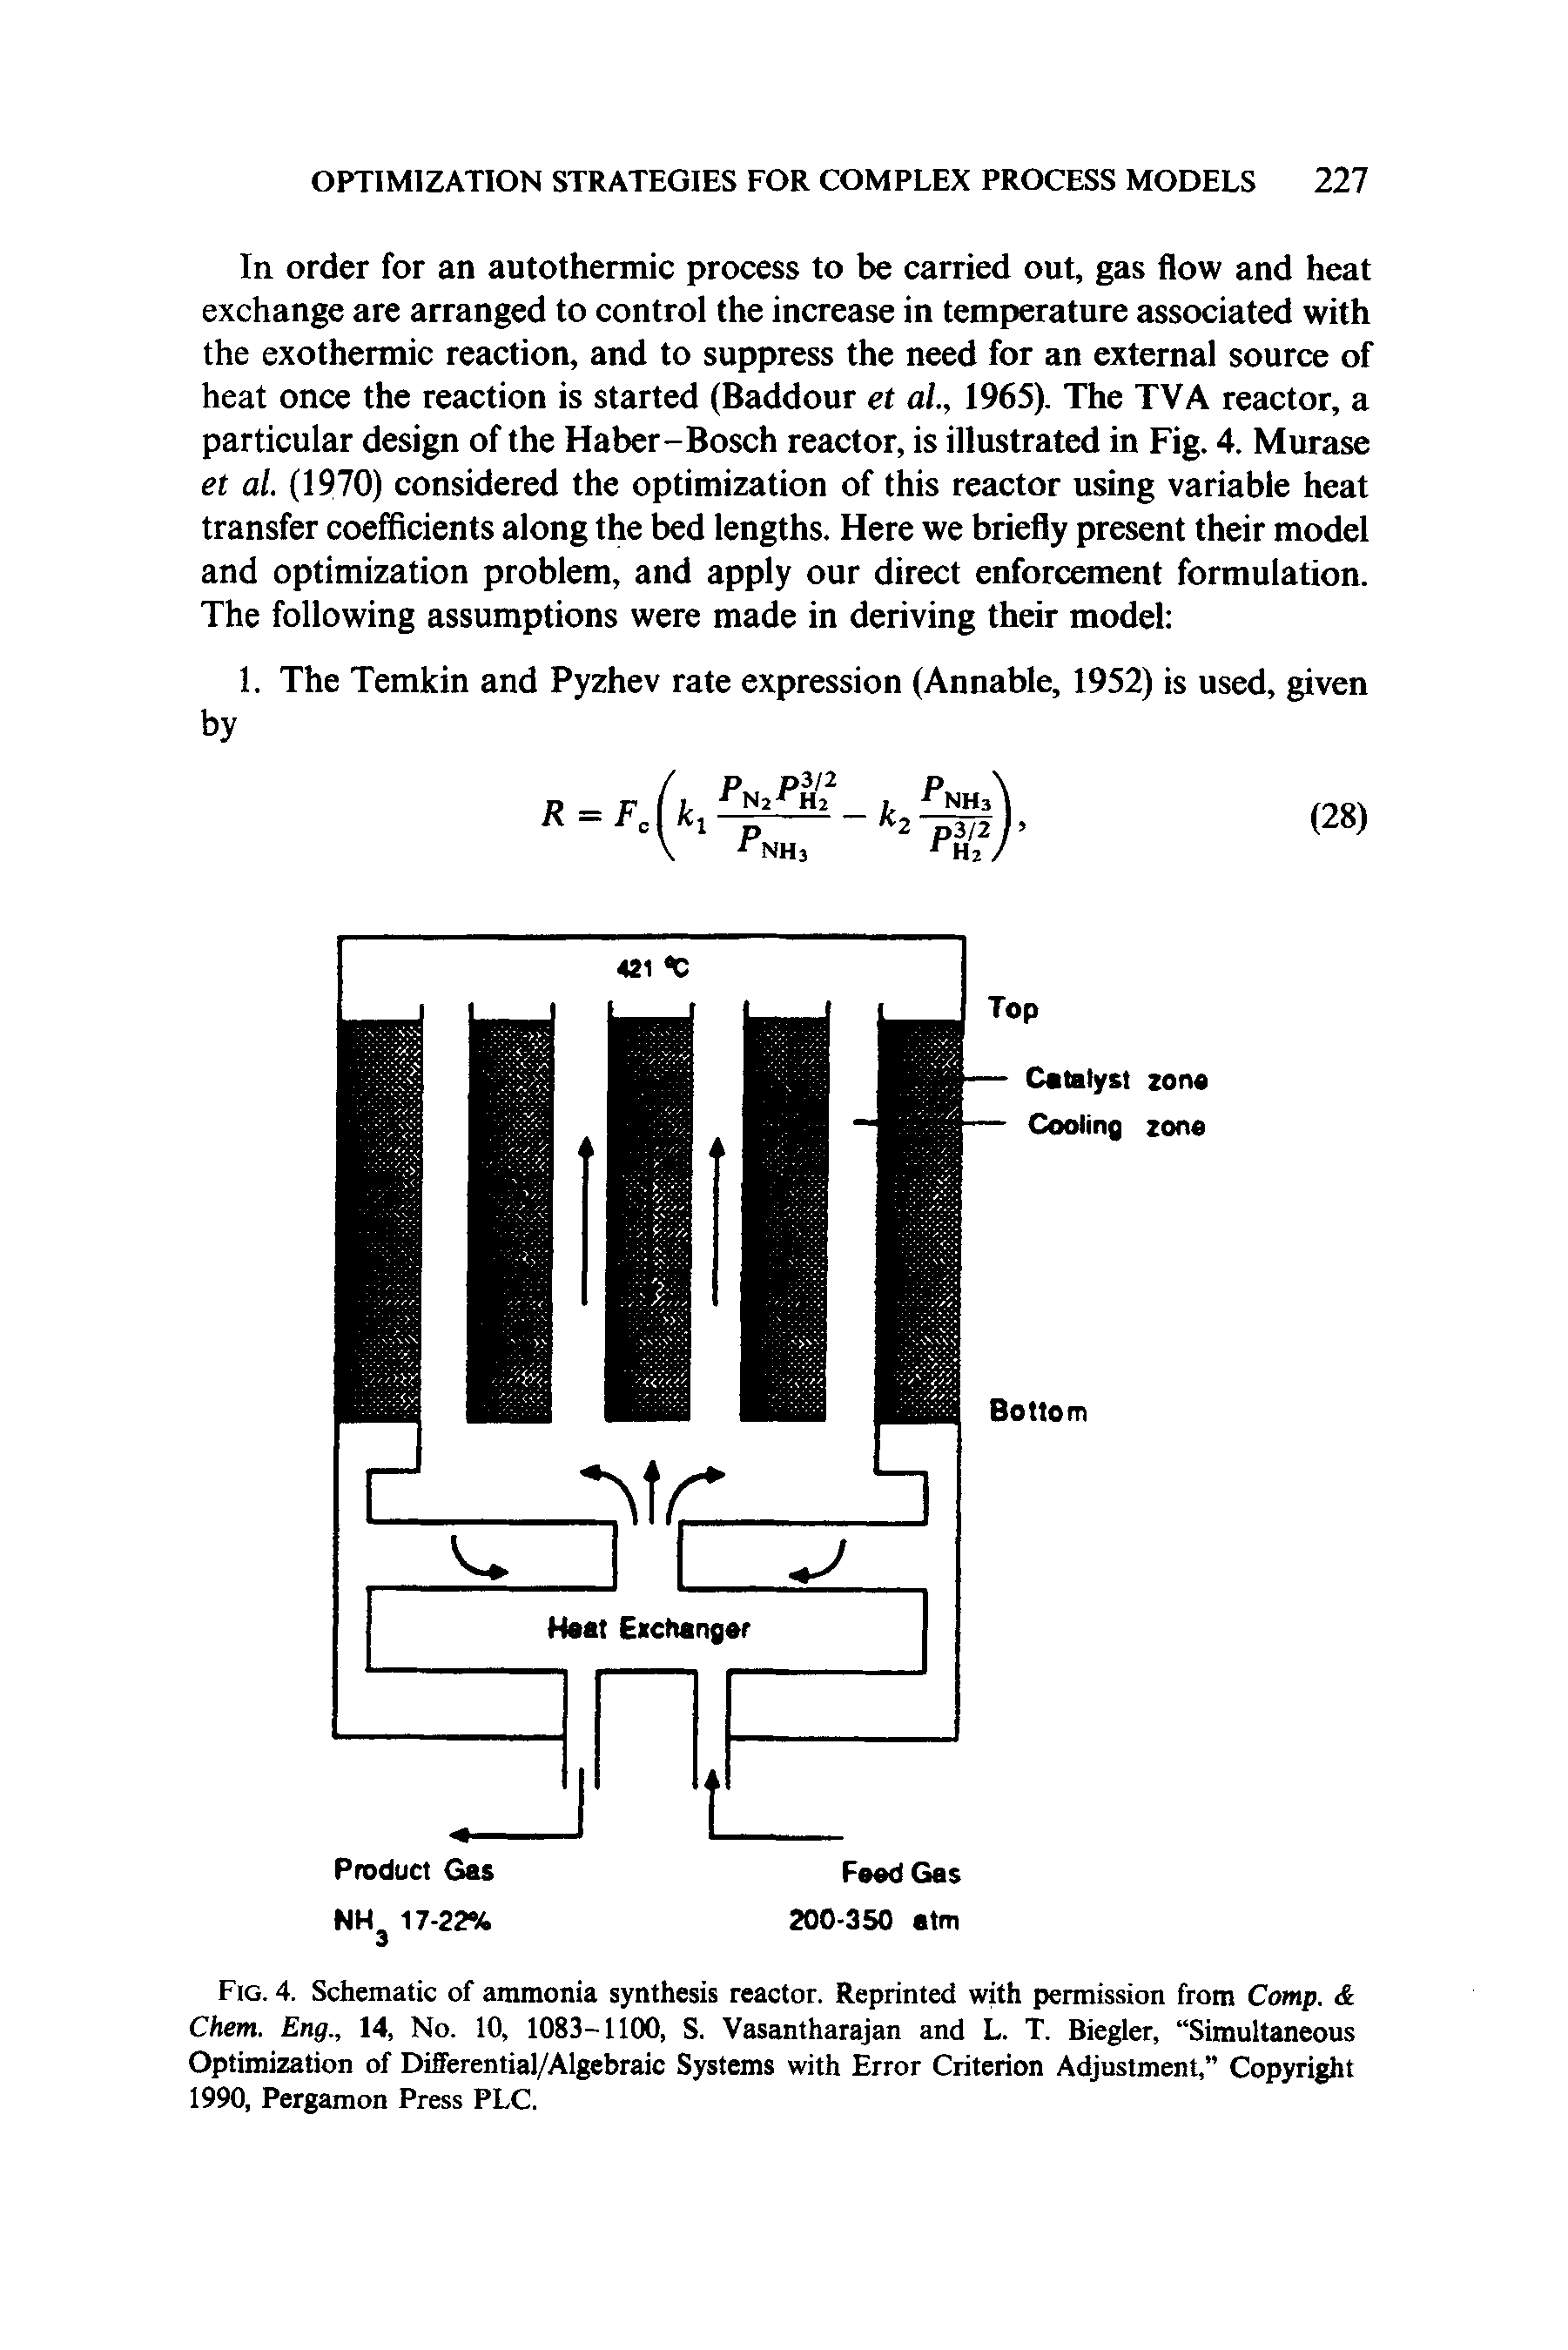 Fig. 4. Schematic of ammonia synthesis reactor. Reprinted with permission from Comp. Chem. Eng., 14, No. 10, 1083-1100, S. Vasantharajan and L. T. Biegler, Simultaneous Optimization of Differential/Algebraic Systems with Error Criterion Adjustment, Copyright 1990, Pergamon Press PLC.